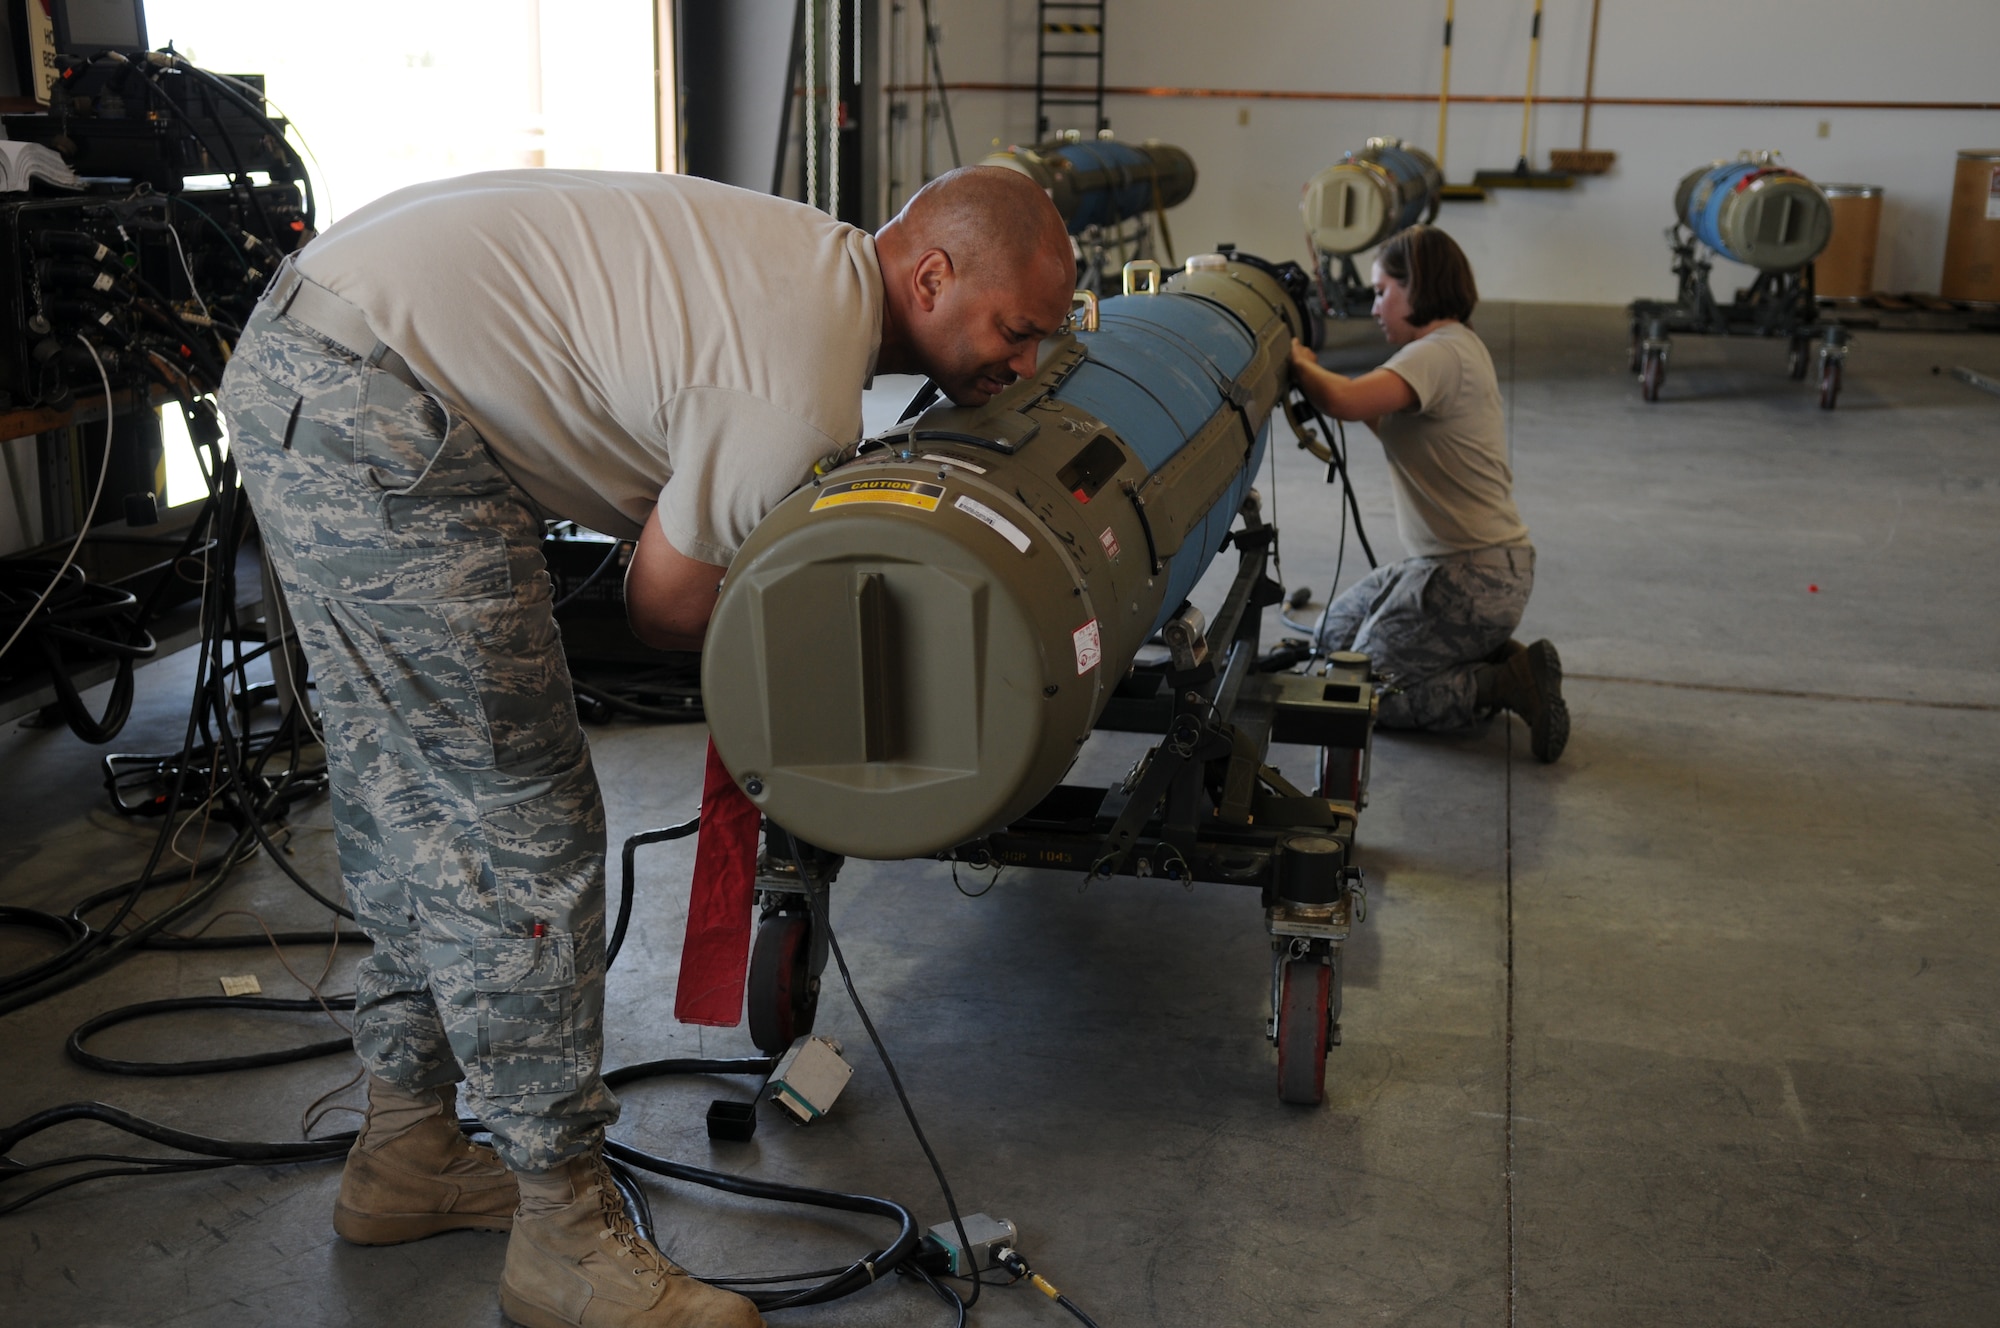 Technical Sgt. Ray Pipkins, precision guided munitions production superintendent for the 4th Equipment Maintenance Squadron at Seymour Johnson Air Force Base, works with Senior Airman Keegan Vanderpoel here July 30 to prepare a bomb for the Air Force air-to-ground Weapons System Evaluation Program known as Combat Hammer.  Airmen and aircraft from 10 Air Combat Command units participated in the Aug. 4-22 program and dropped over $1.2 million-worth of munitions. With support from the 388th Range Squadron, Airmen in Eglin AFB's 86th Fighter Weapons Squadron, 53rd Wing, will collect and analyze data on how these precision weapons performed and their suitability for use in War on Terror deployments. (U.S. Air Force photo by James Arrowood)     